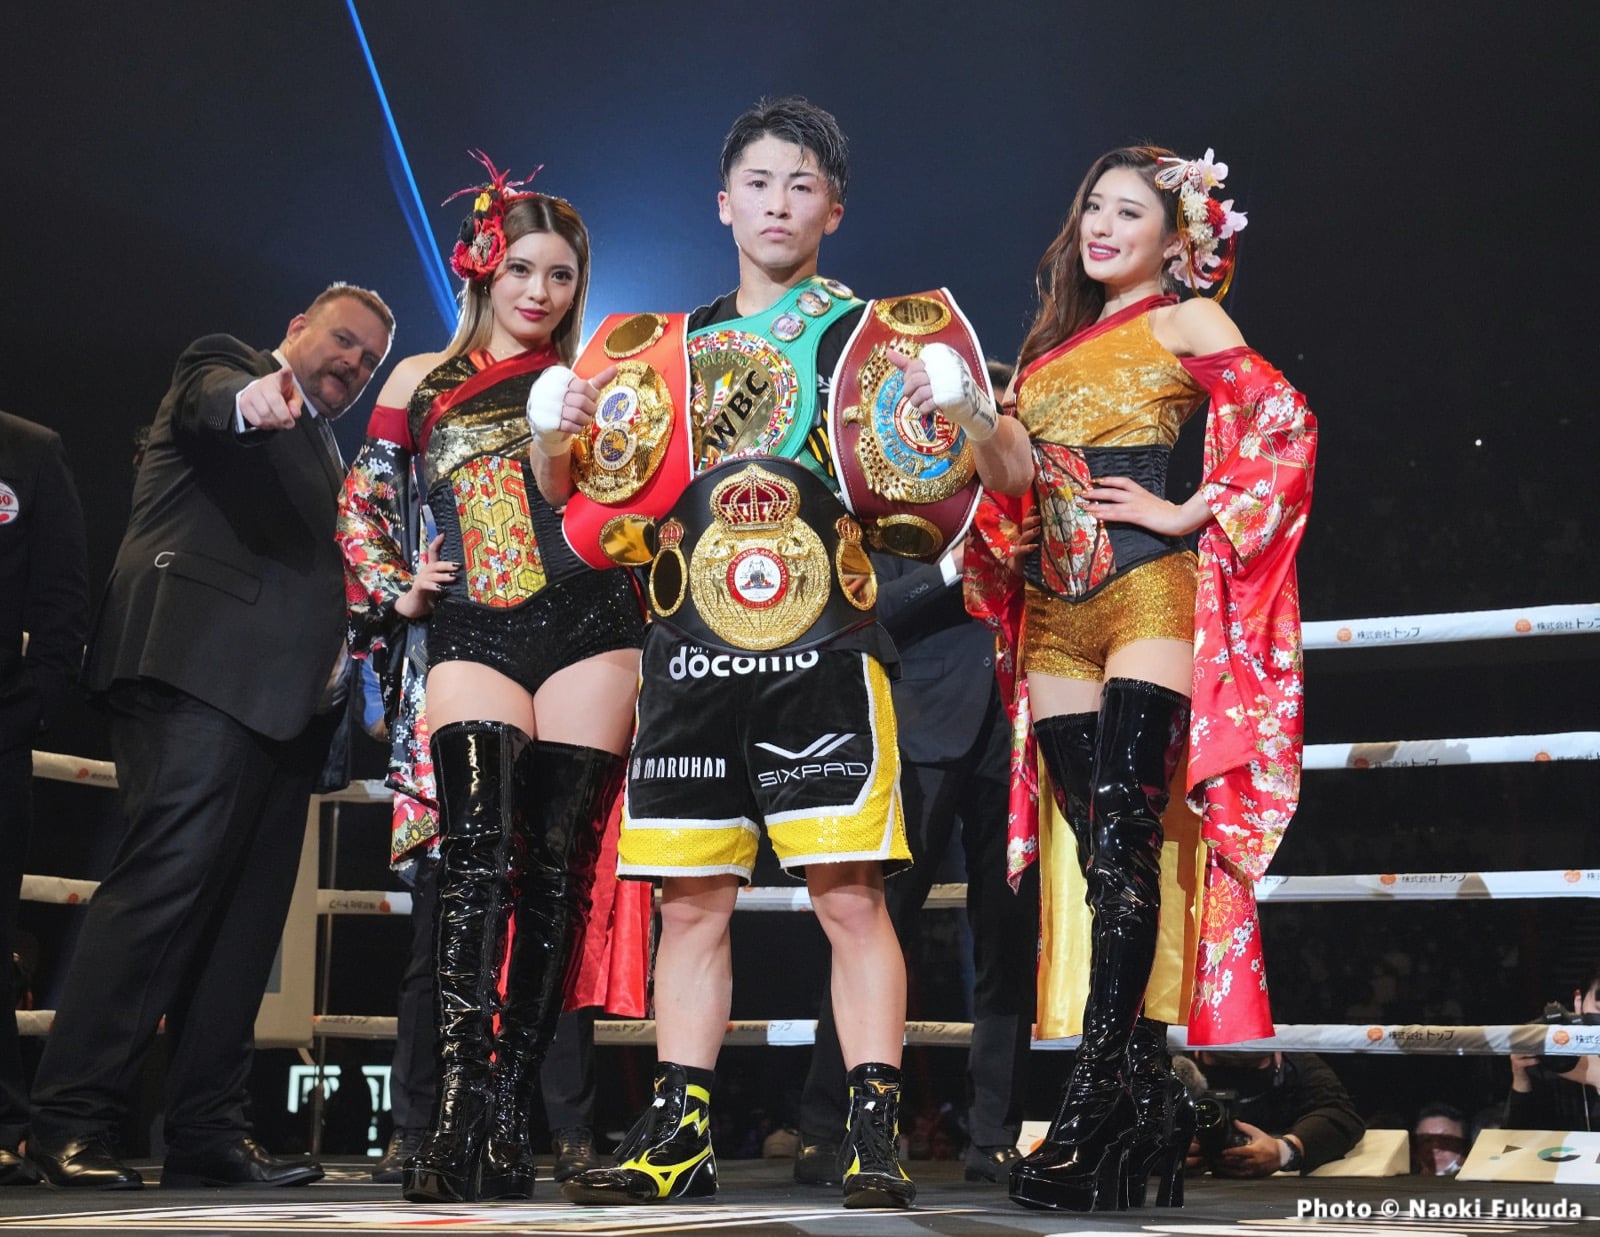 Naoya Inoue Unified All Four Bantamweight Belts In 2022; Four Belts At 122 Pounds In 2023?